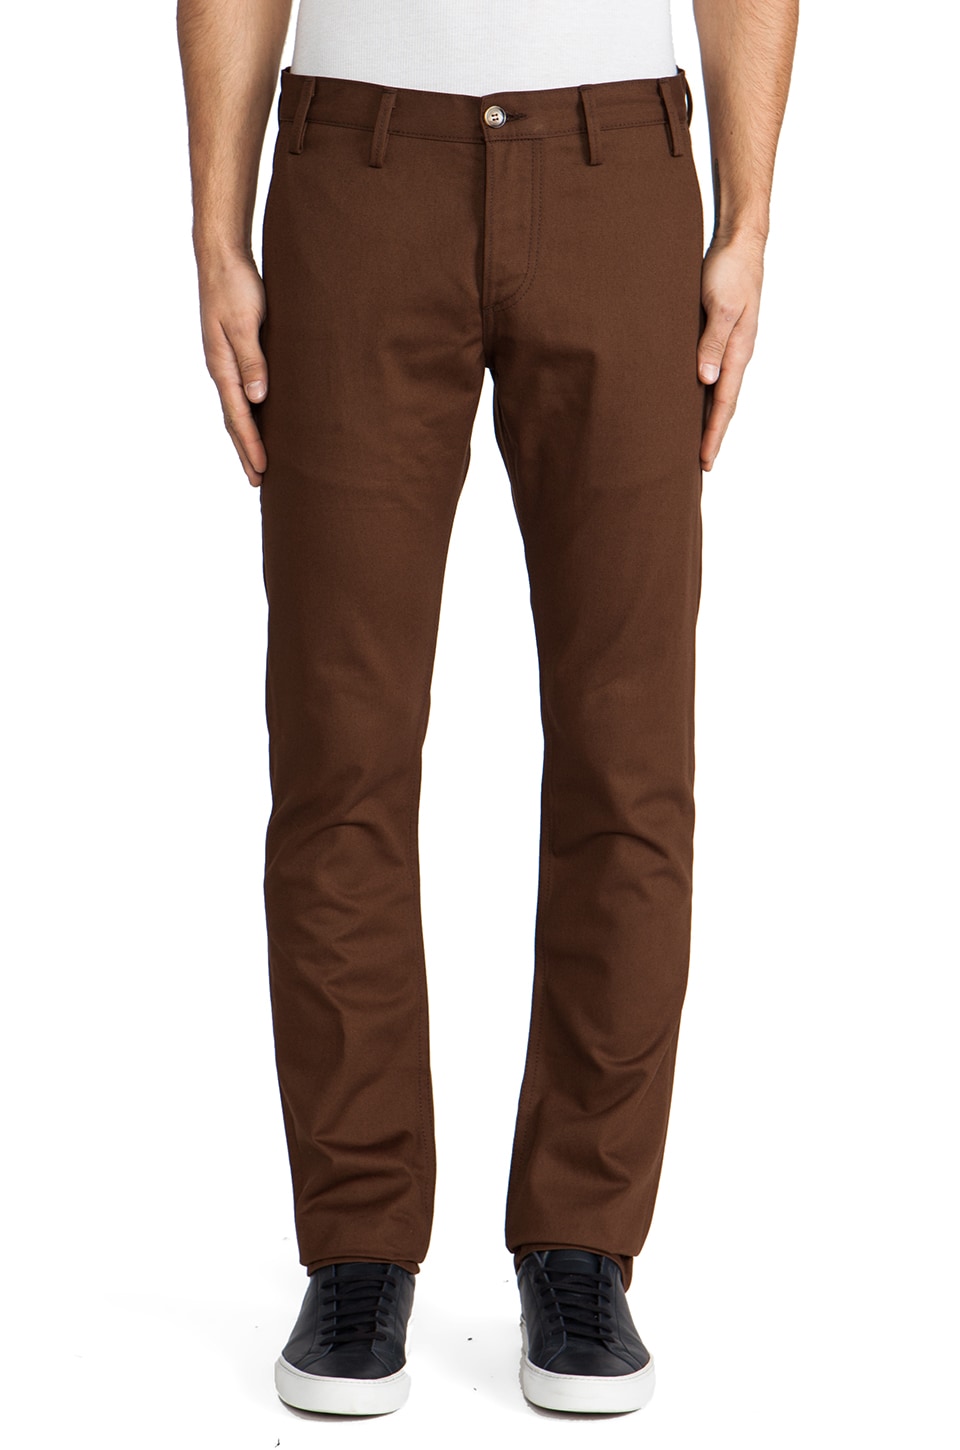 Rogue Territory Officer Trouser 8oz Twill in Nutmeg | REVOLVE